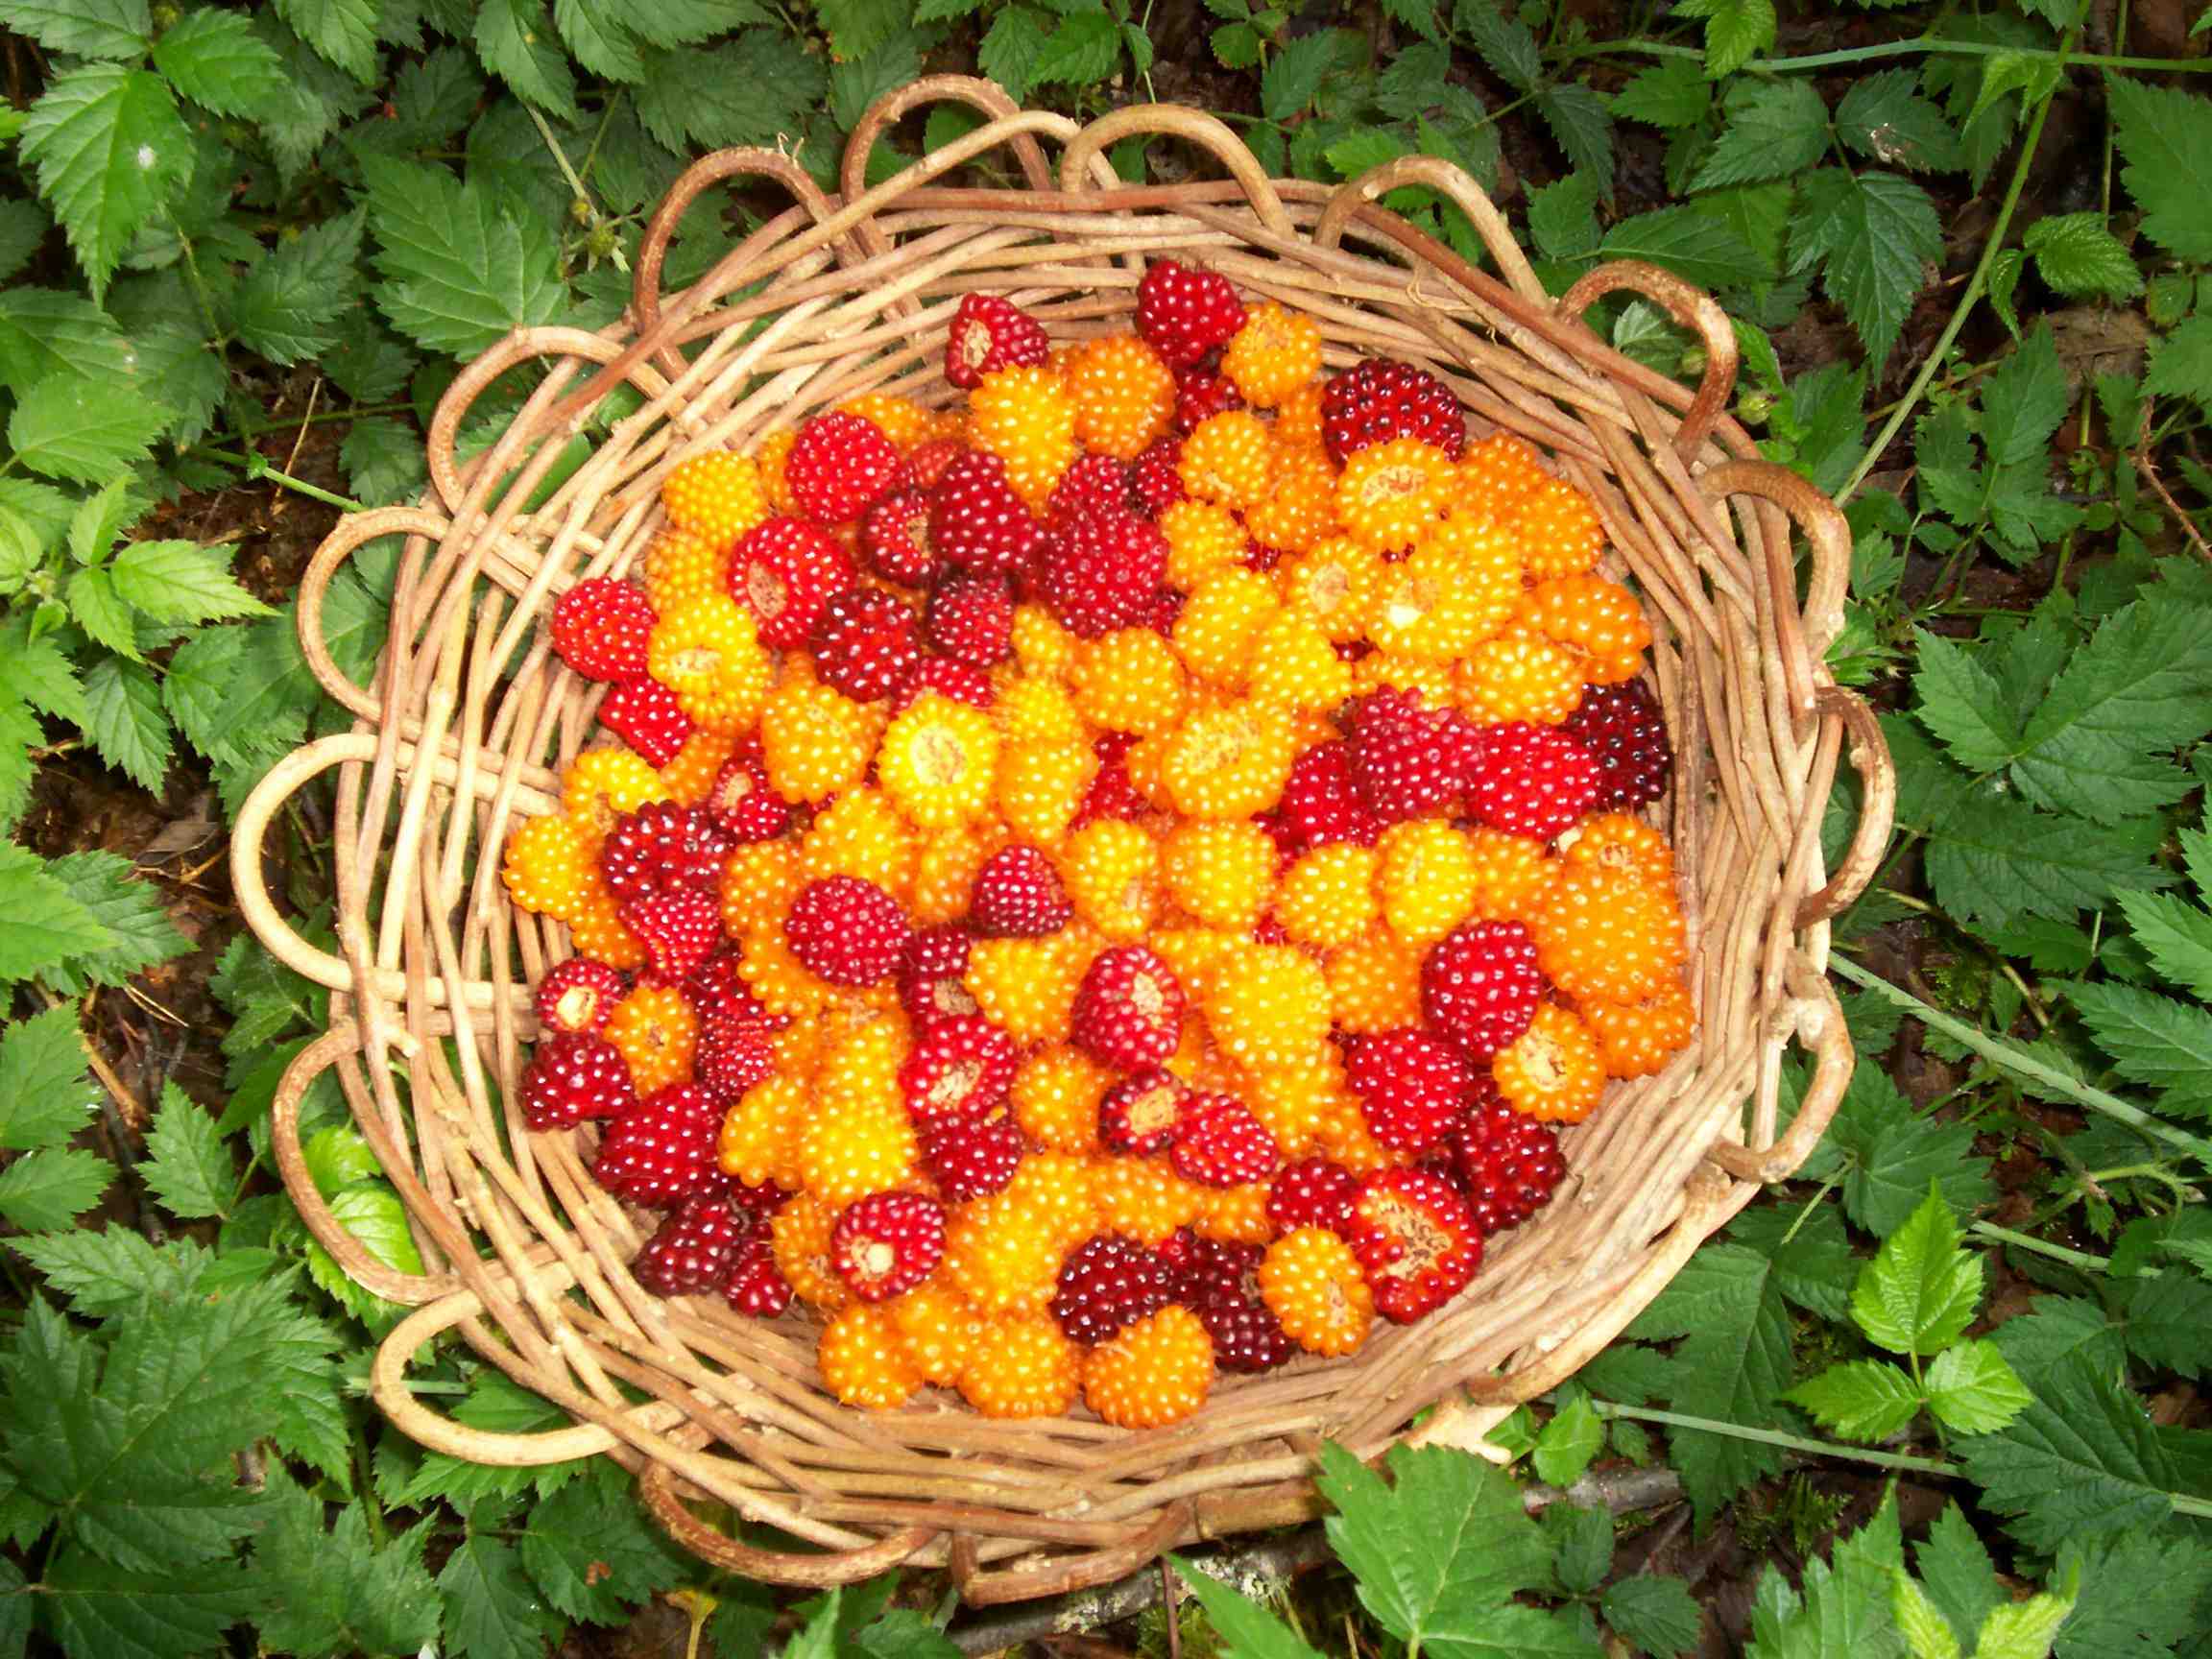 Best Wild Plants for Basket Weaving That You Can Forage